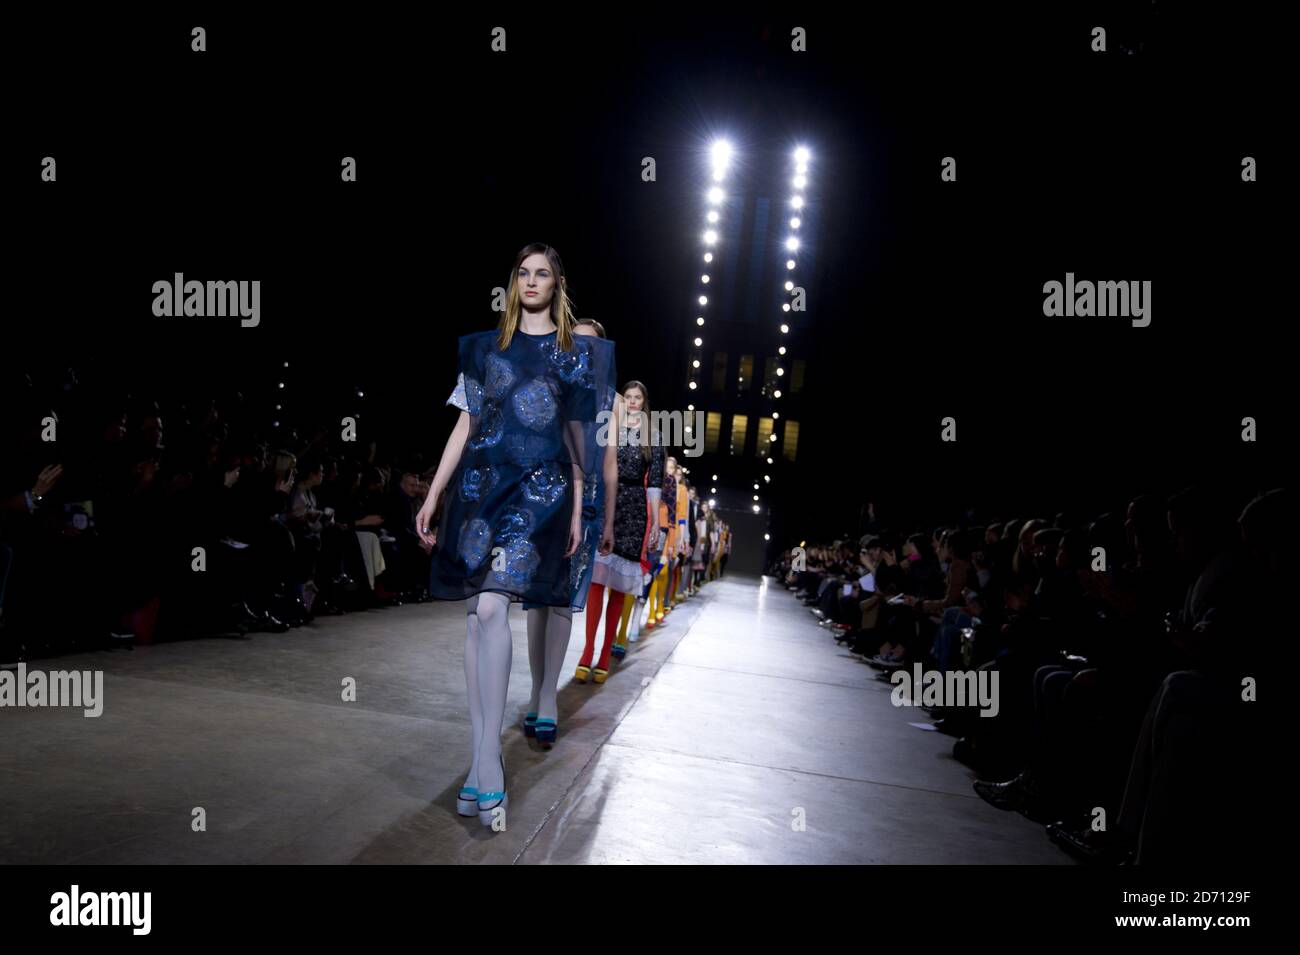 A model on the catwalk during the Van der Ham fashion show, held at the ...